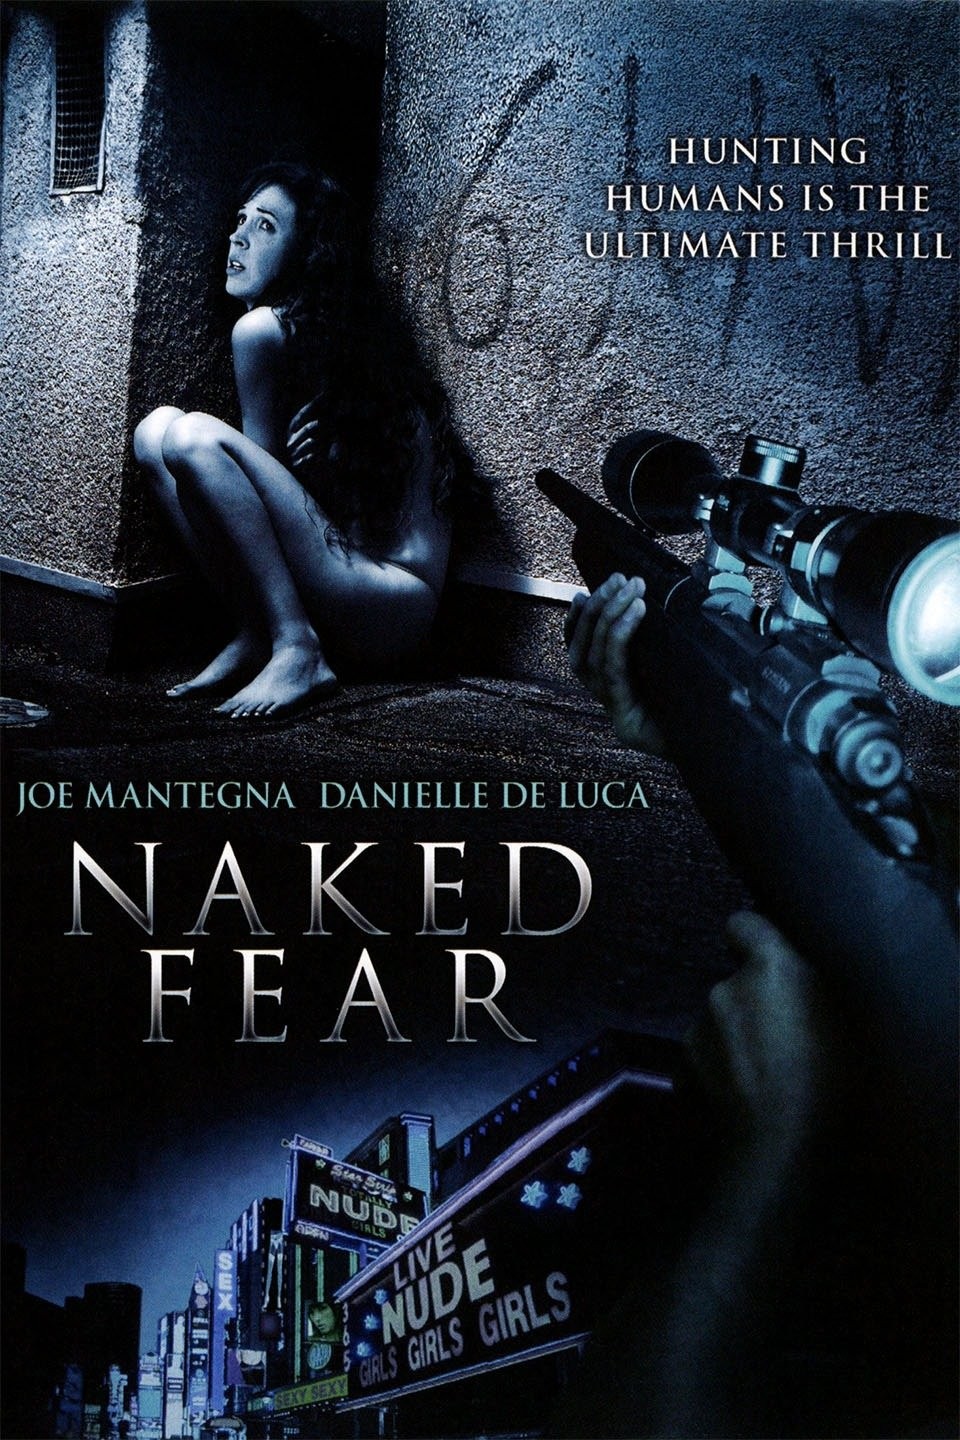 Naked fear movie